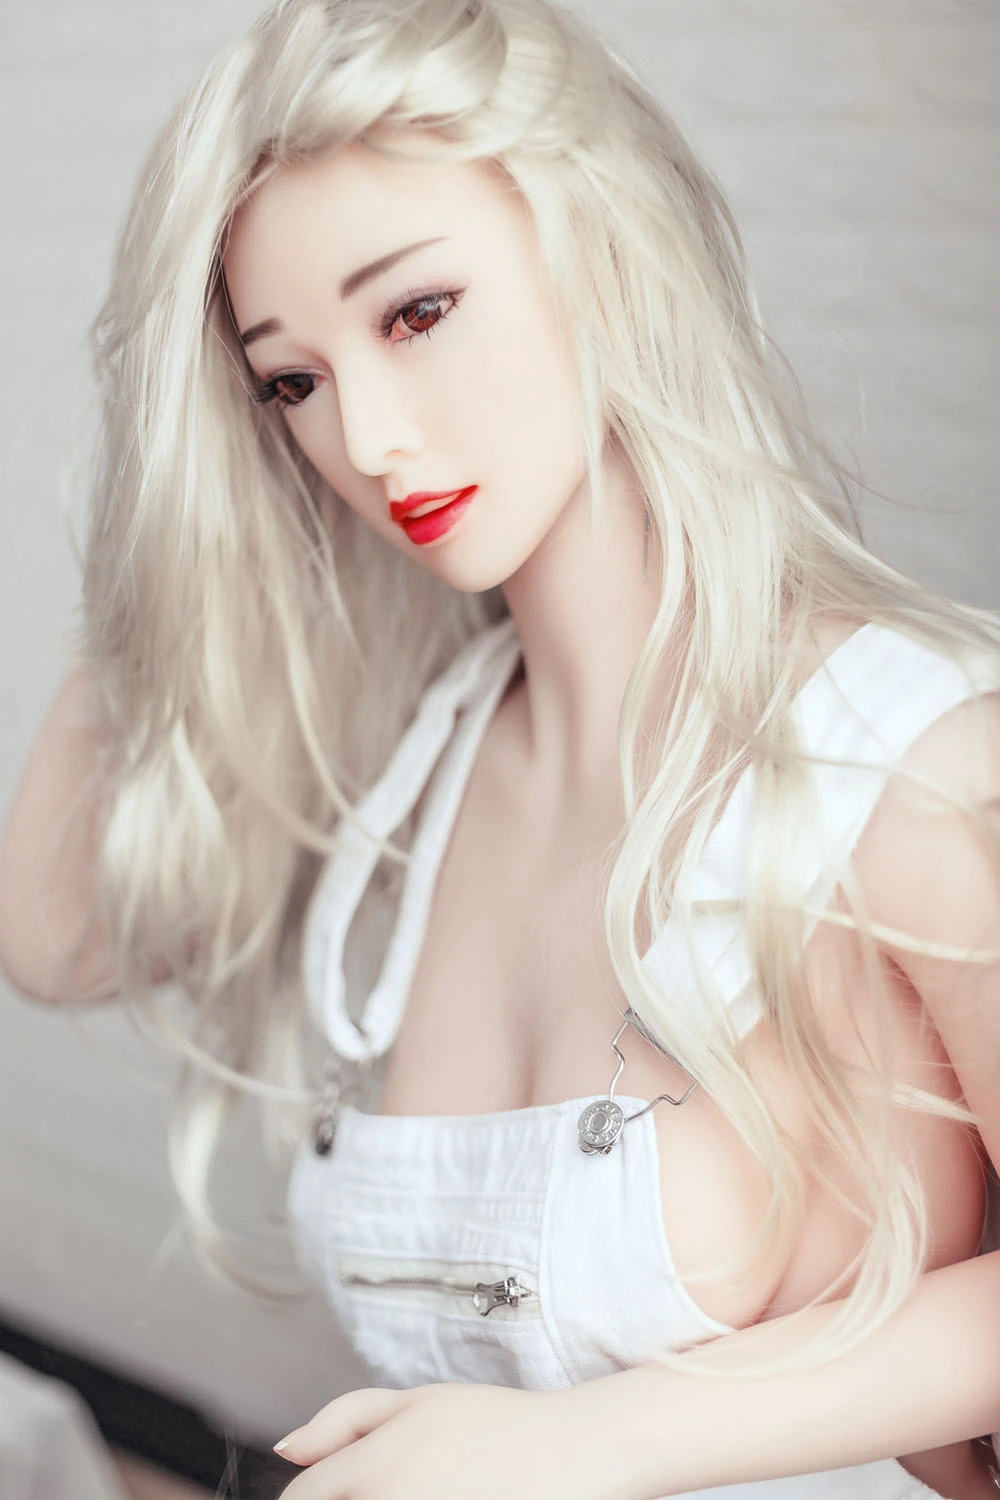 Red Lips doll